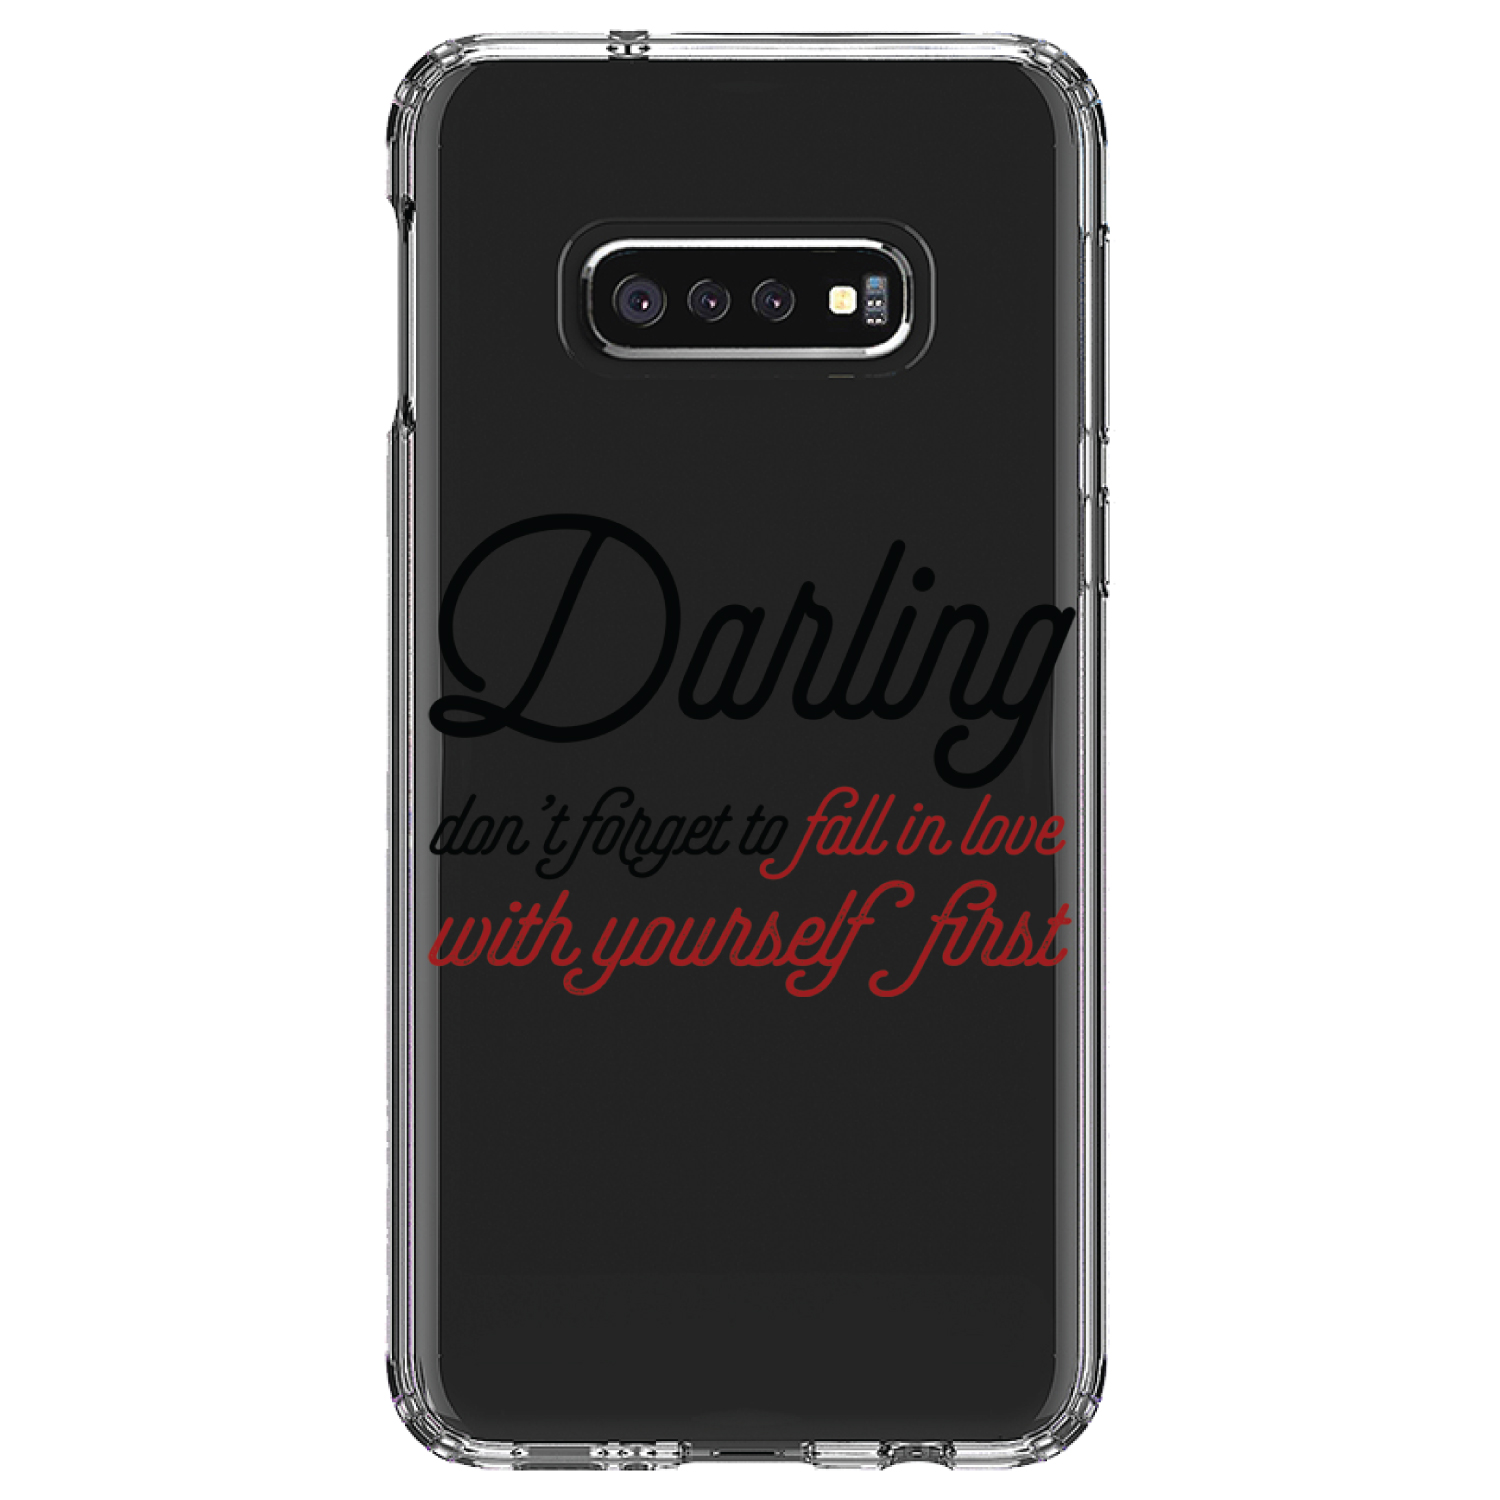 DistinctInk Clear Shockproof Hybrid Case for Samsung Galaxy S10e (5.8" Screen) - TPU Bumper Acrylic Back Tempered Glass Screen Protector - Darling Don't Forget to Fall In Love with Yourself - image 1 of 2